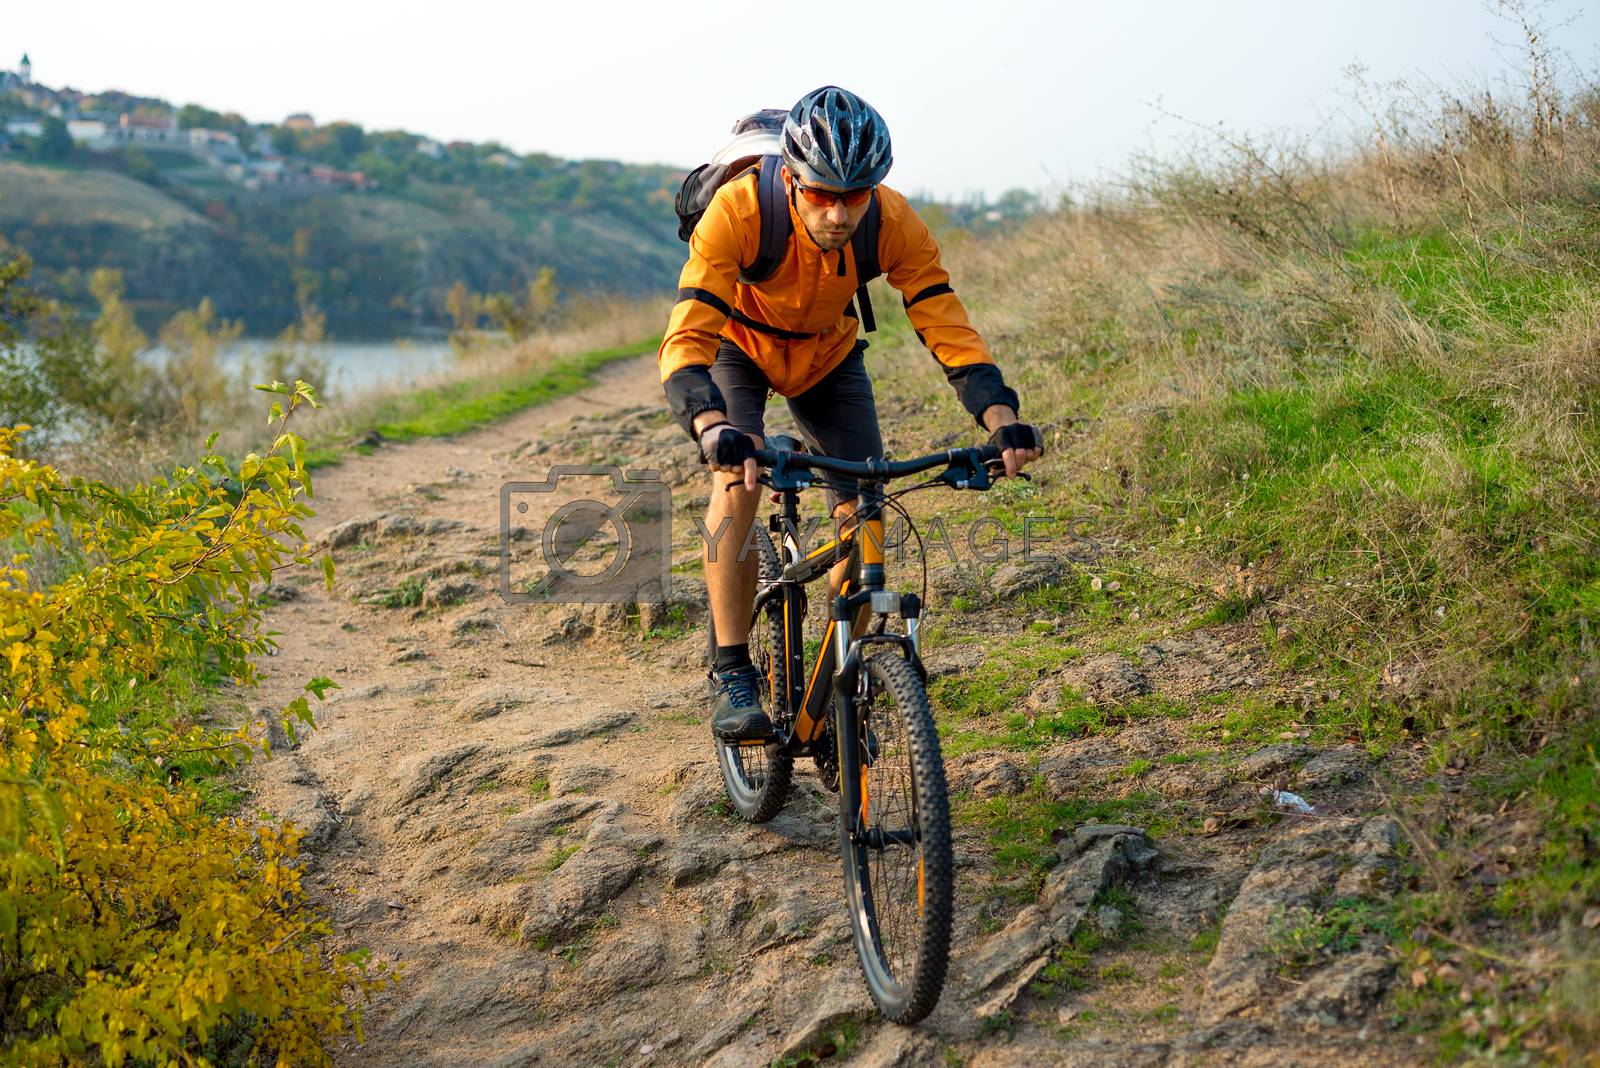 Royalty free image of Cyclist in Orange Riding the Mountain Bike on the Autumn Rocky Trail. Extreme Sport and Enduro Biking Concept. by maxpro